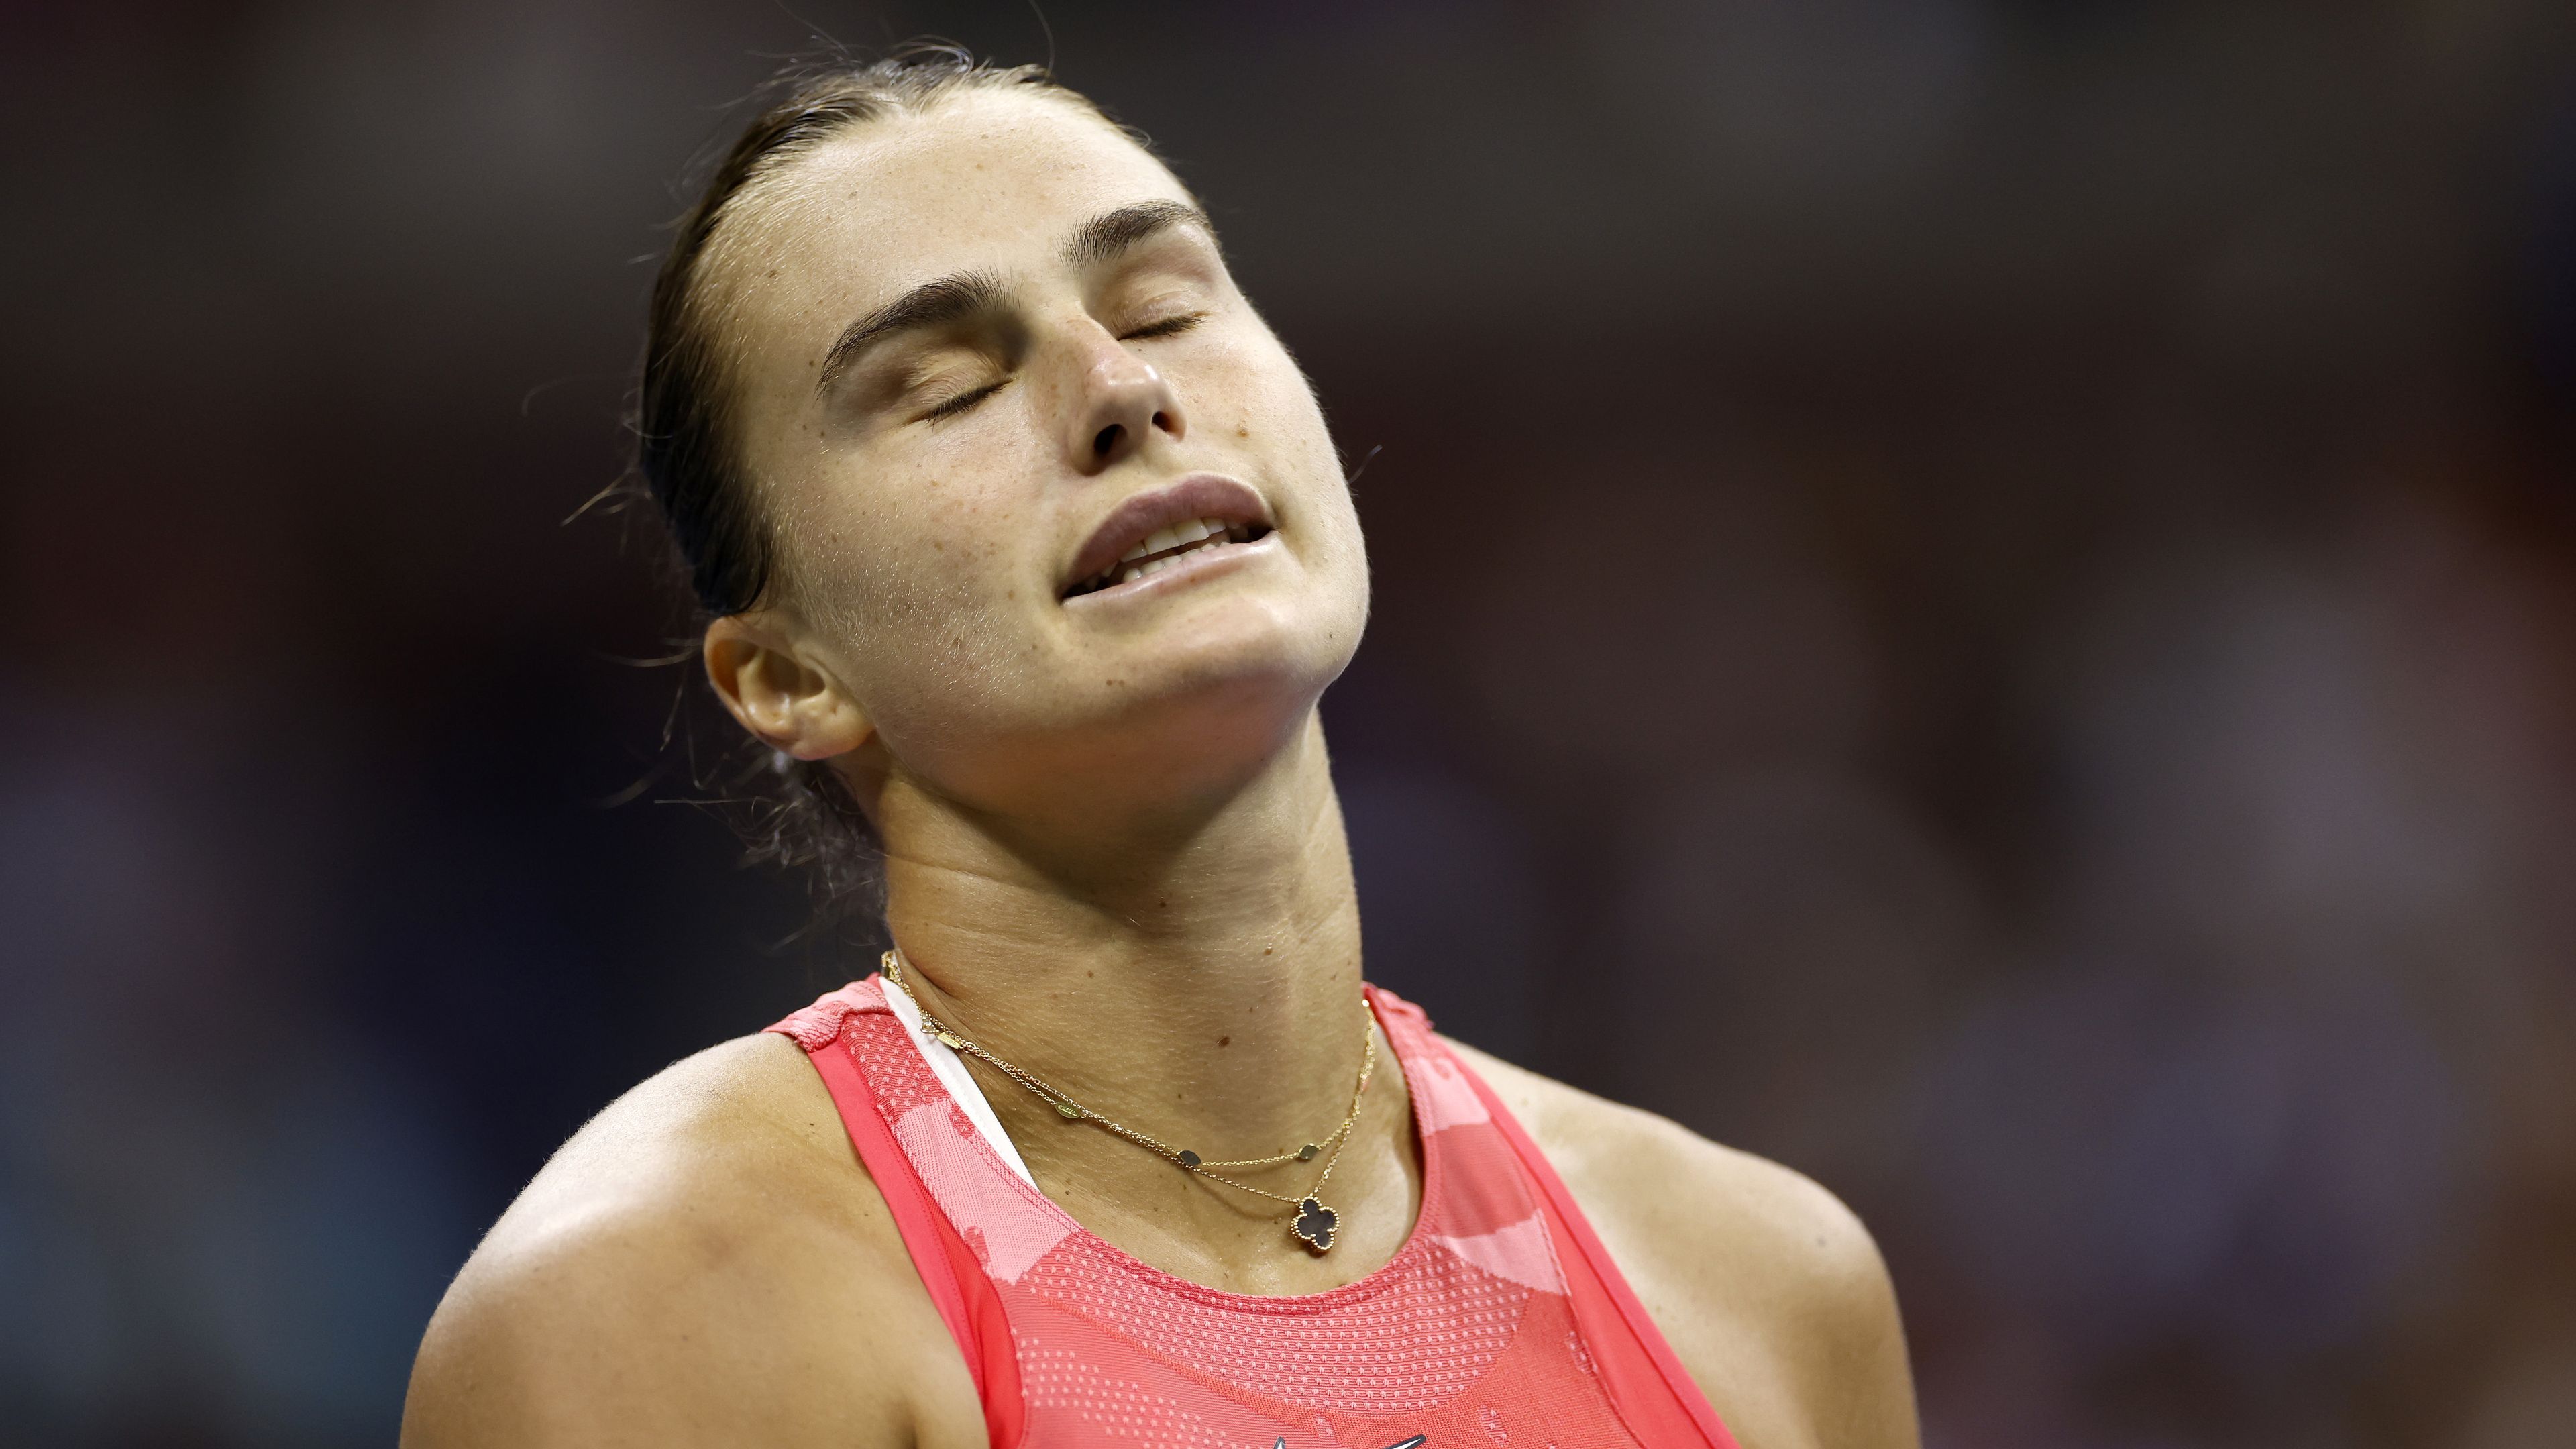 Aryna Sabalenka of Belarus reacts after a point against Coco Gauff of the United States during their Women&#x27;s Singles Final match on Day Thirteen of the 2023 US Open at the USTA Billie Jean King National Tennis Center on September 09, 2023 in the Flushing neighborhood of the Queens borough of New York City. (Photo by Sarah Stier/Getty Images)